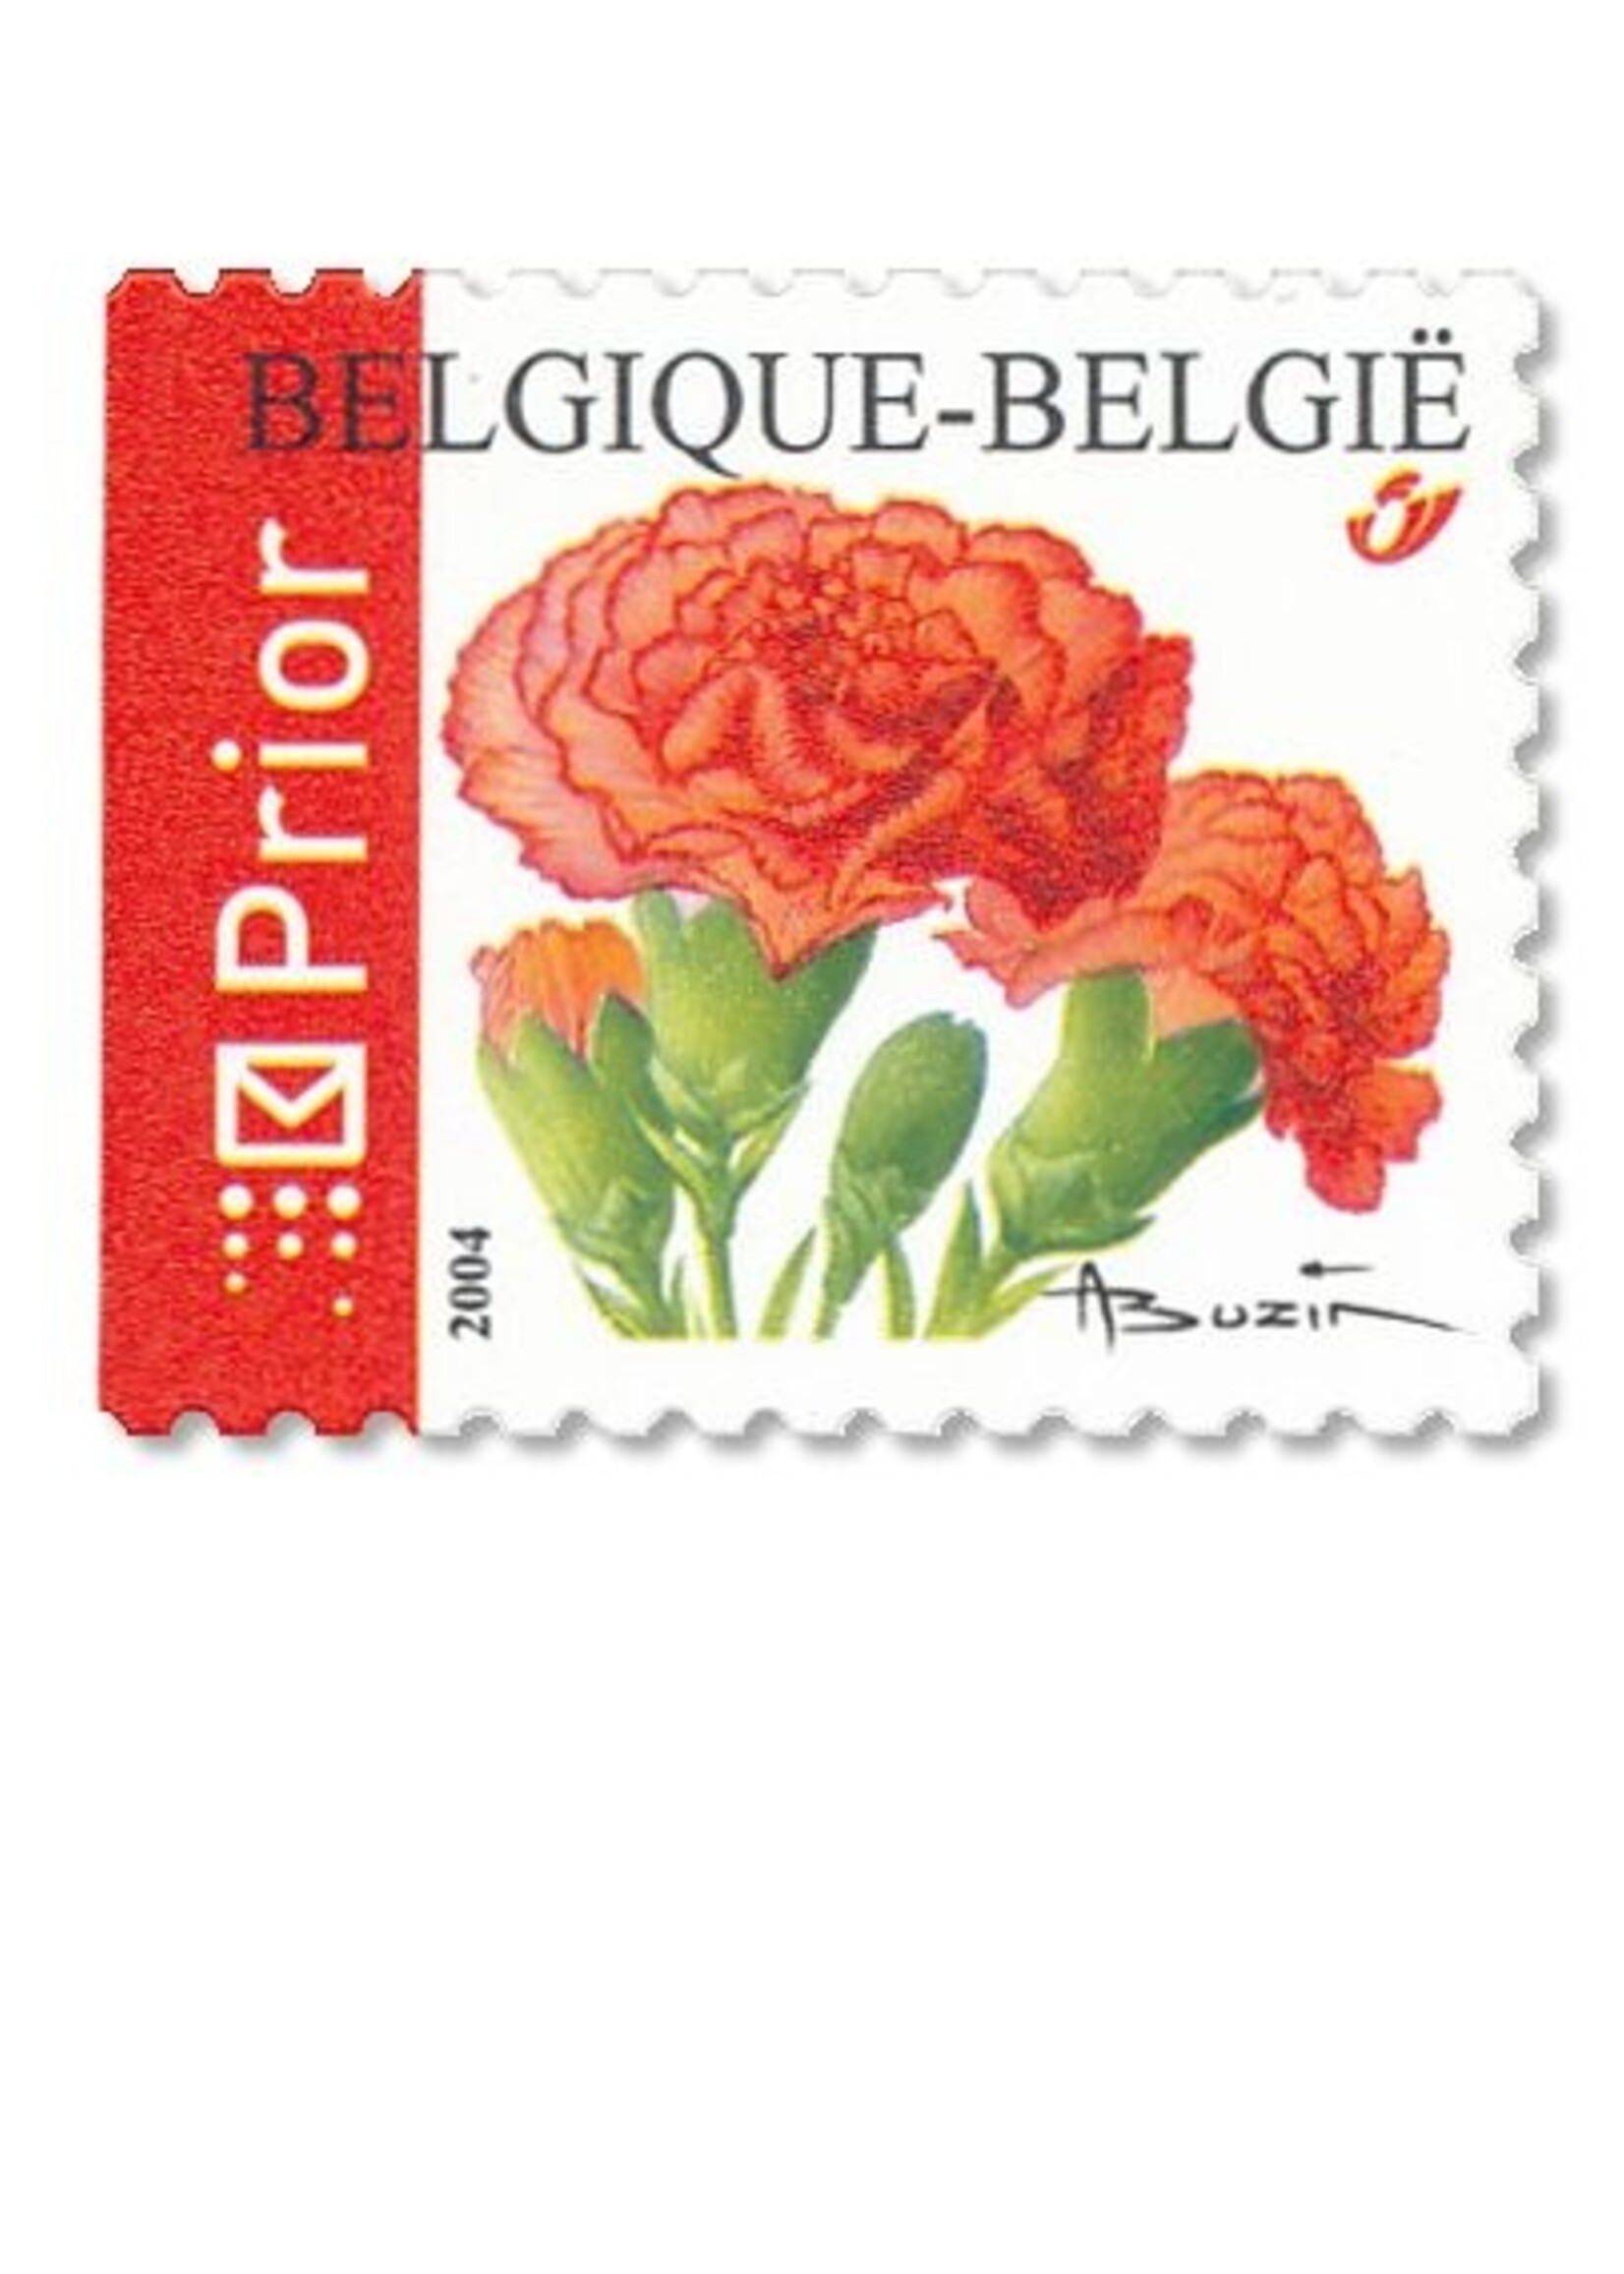 Theme Nature 1 - Booklet with 10 self-adhesive stamps - Rate 1, Belgium